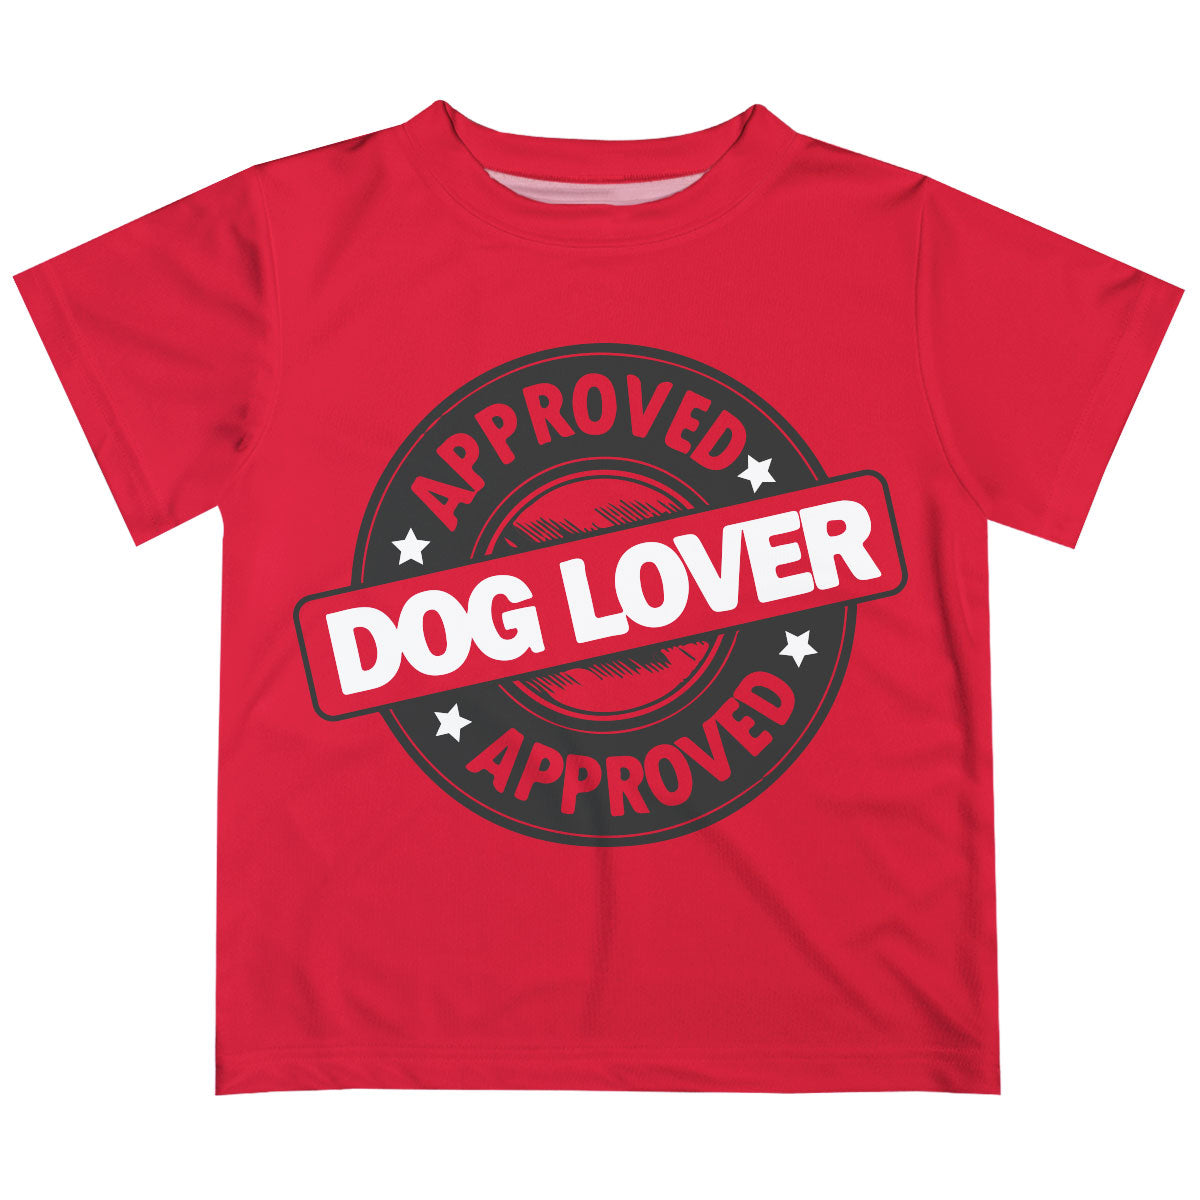 Dog Lover Red Short Sleeve Tee Shirt - Wimziy&Co.